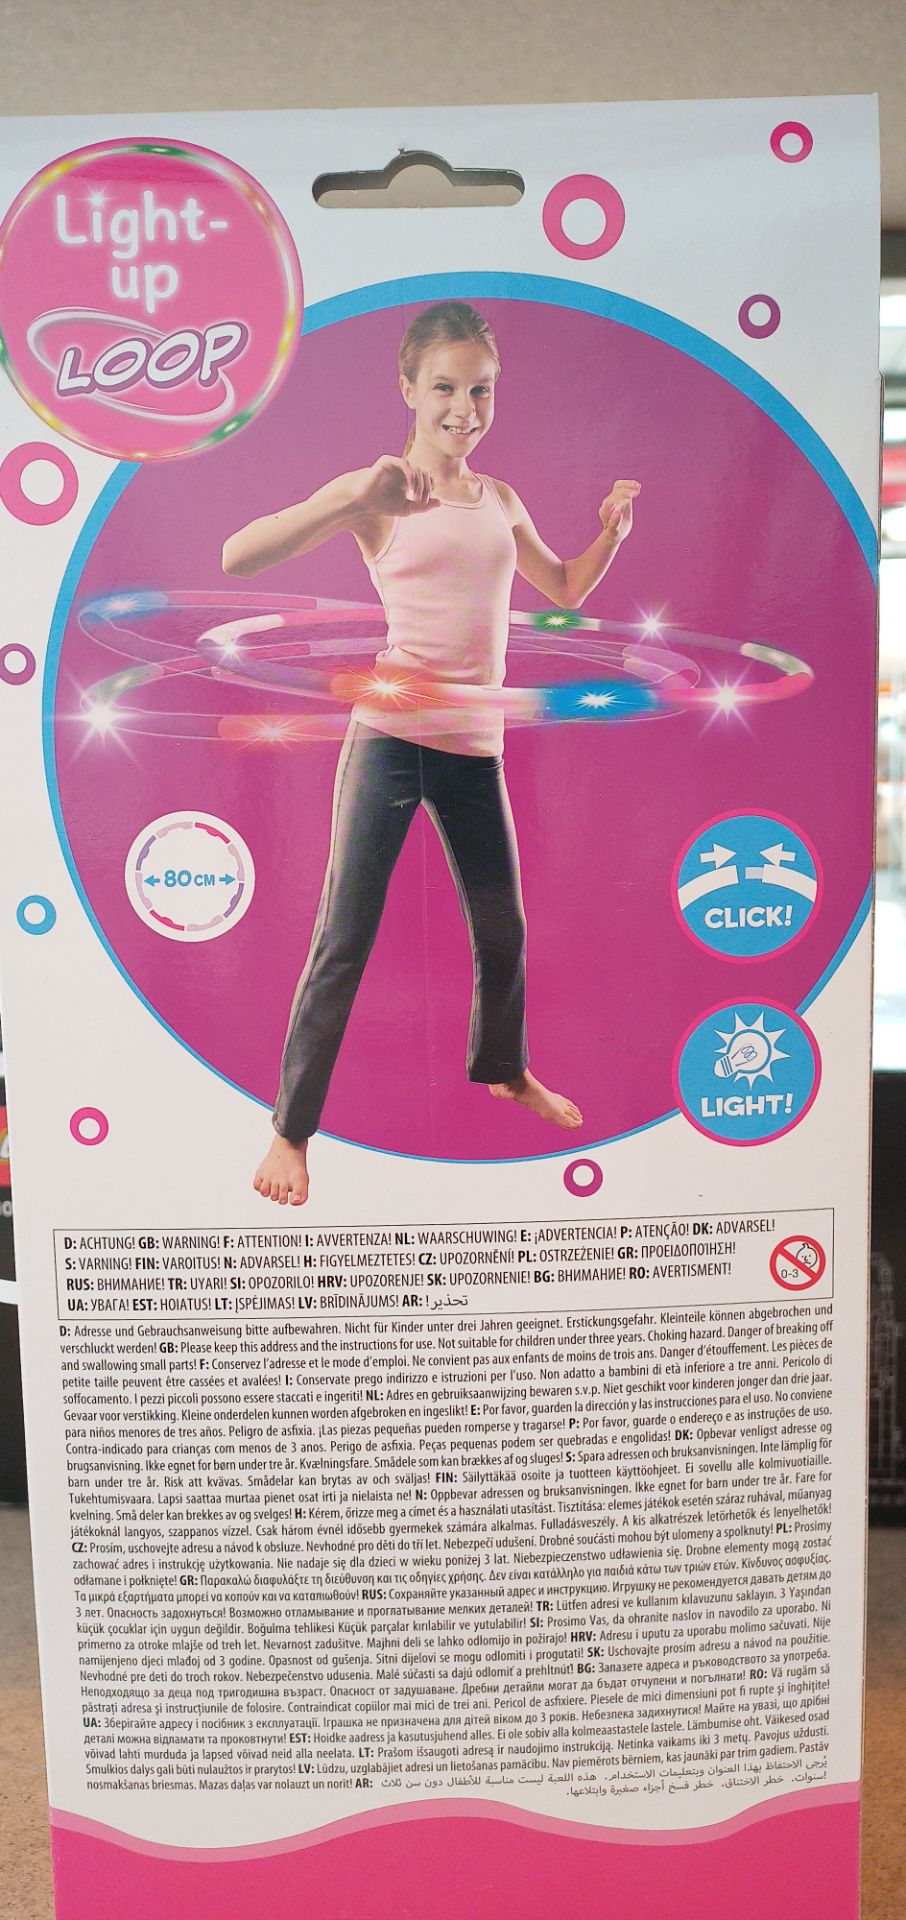 5 x BRAND NEW AND SEALED SIMBA LED HULA HOOP RING, RRP £10 *PLUS VAT* - Image 4 of 5